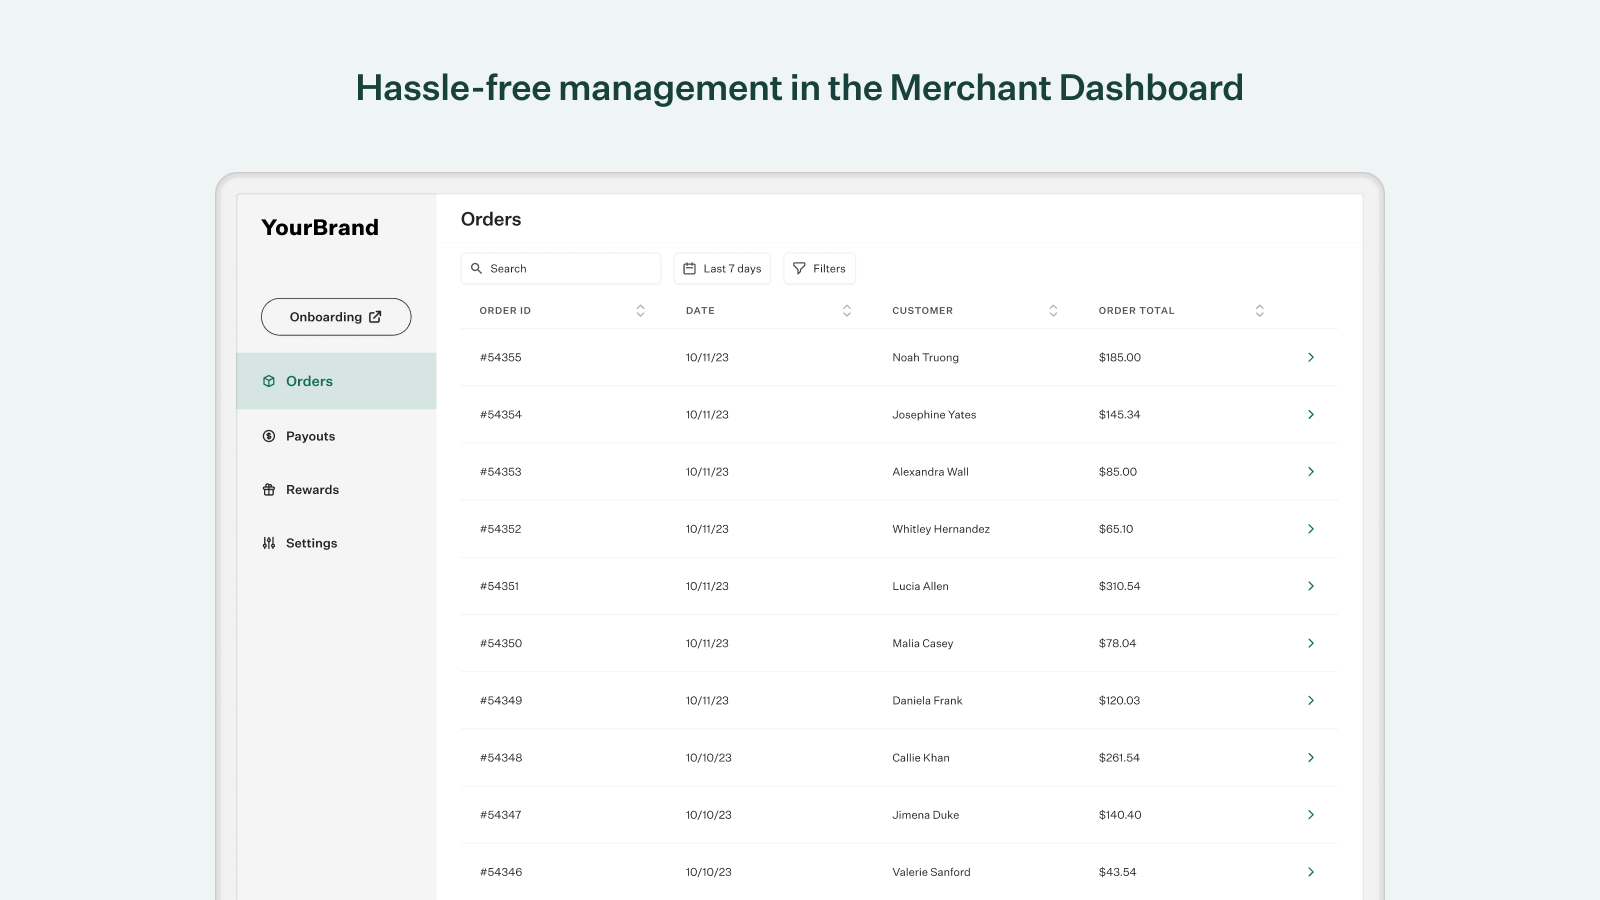 Hassle-free management in the Merchant Dashboard